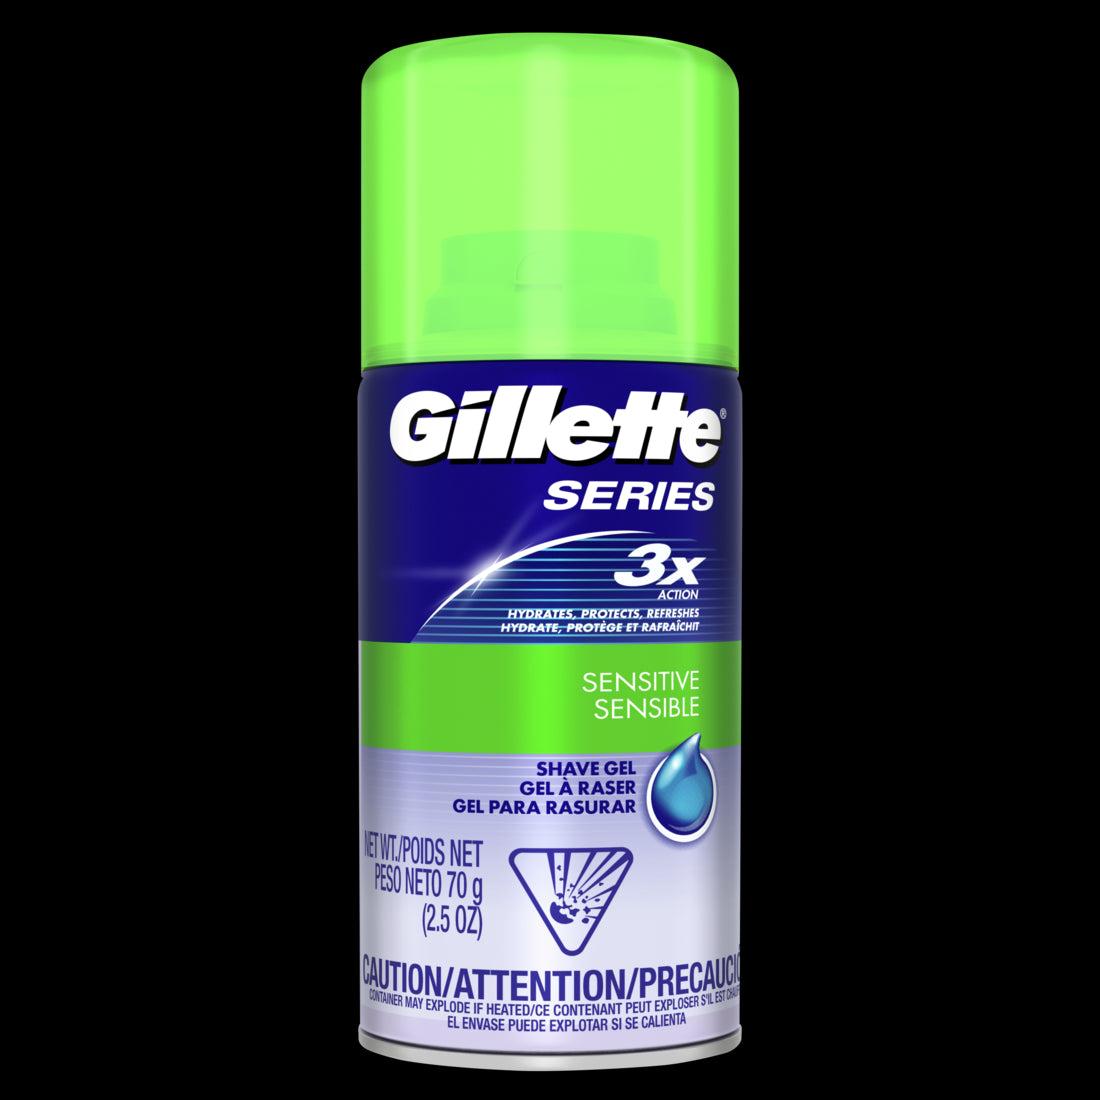 Gillette Series Soothing Shave Gel for men with Aloe Vera - 2.5oz/24pk